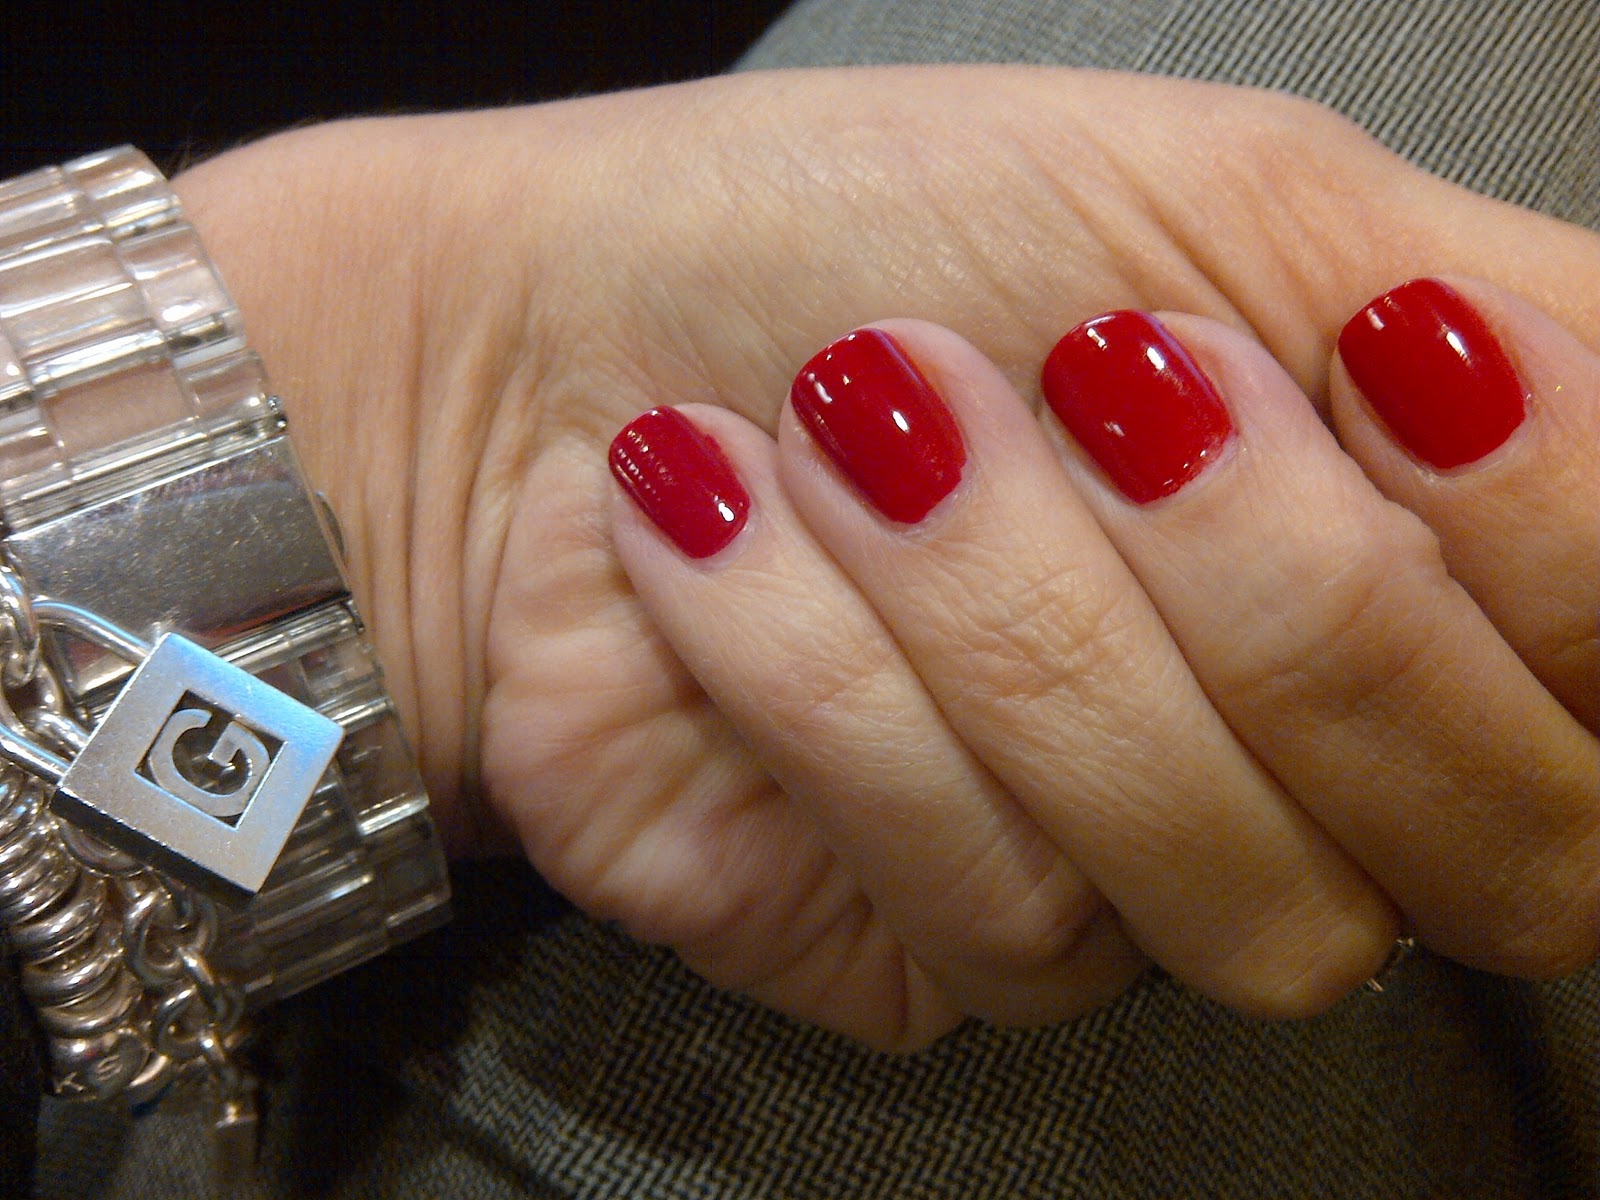 1. OPI Nail Lacquer in "Big Apple Red" - wide 1